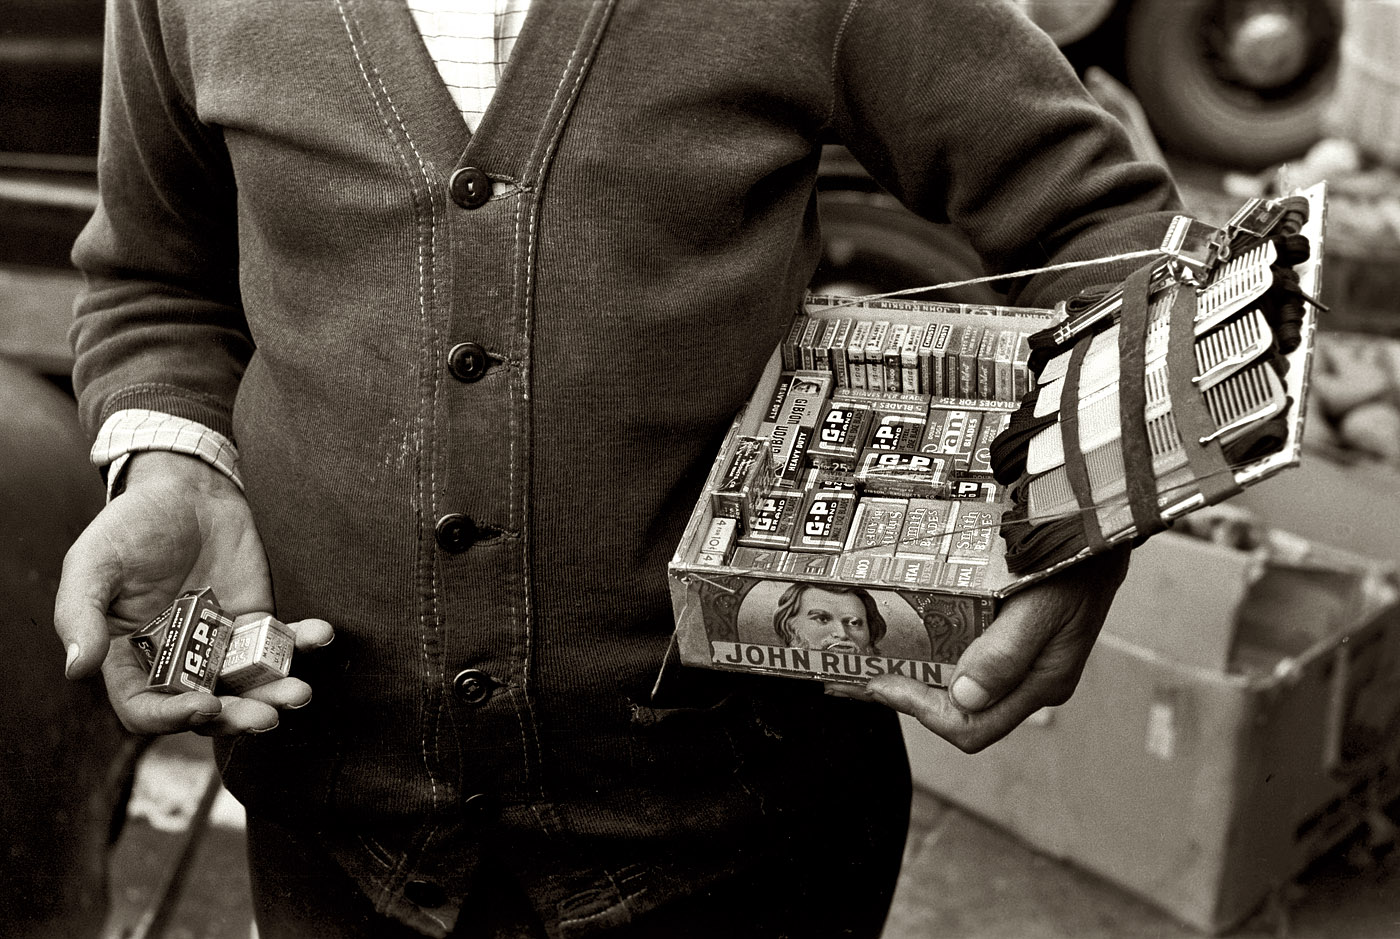 November 1939. "Street vendor's goods. Waco, Texas." View full size. 35mm nitrate negative by Russell Lee for the Farm Security Administration.